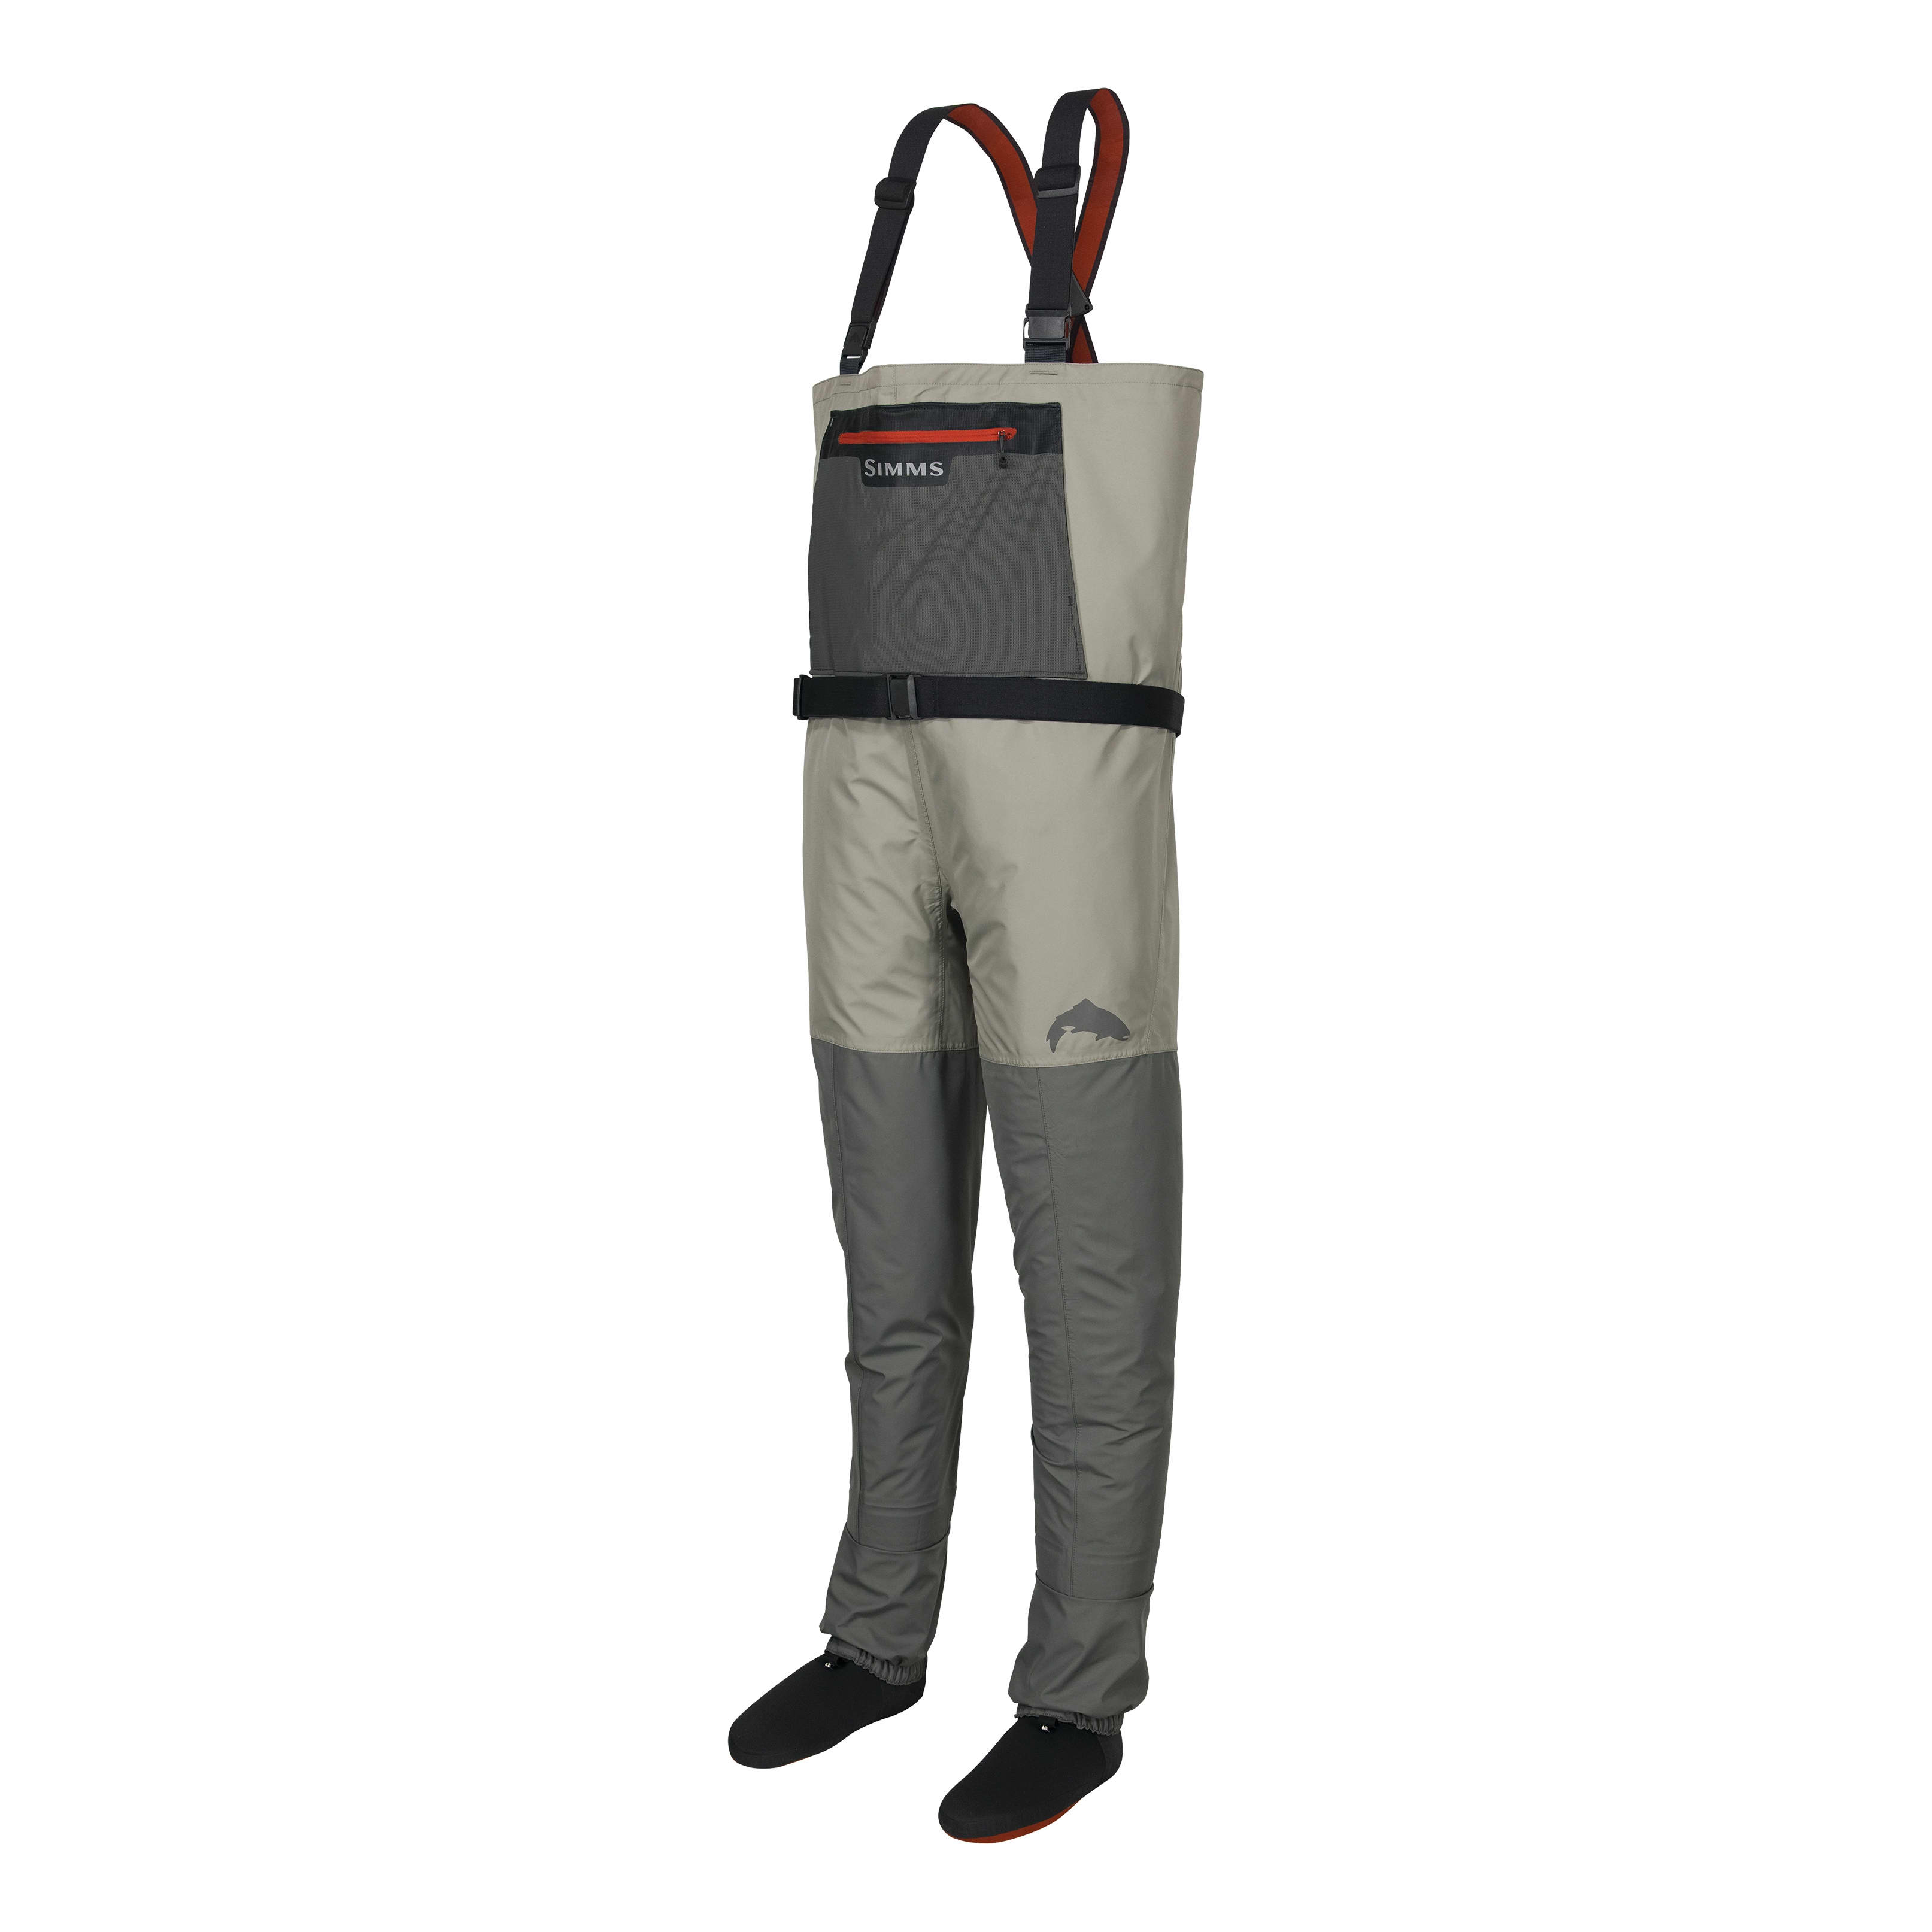 Simms Women's Tributary Stockingfoot Chest-High Fly Fishing Waders -  Durable, Breathable, Waterproof Waders for Women